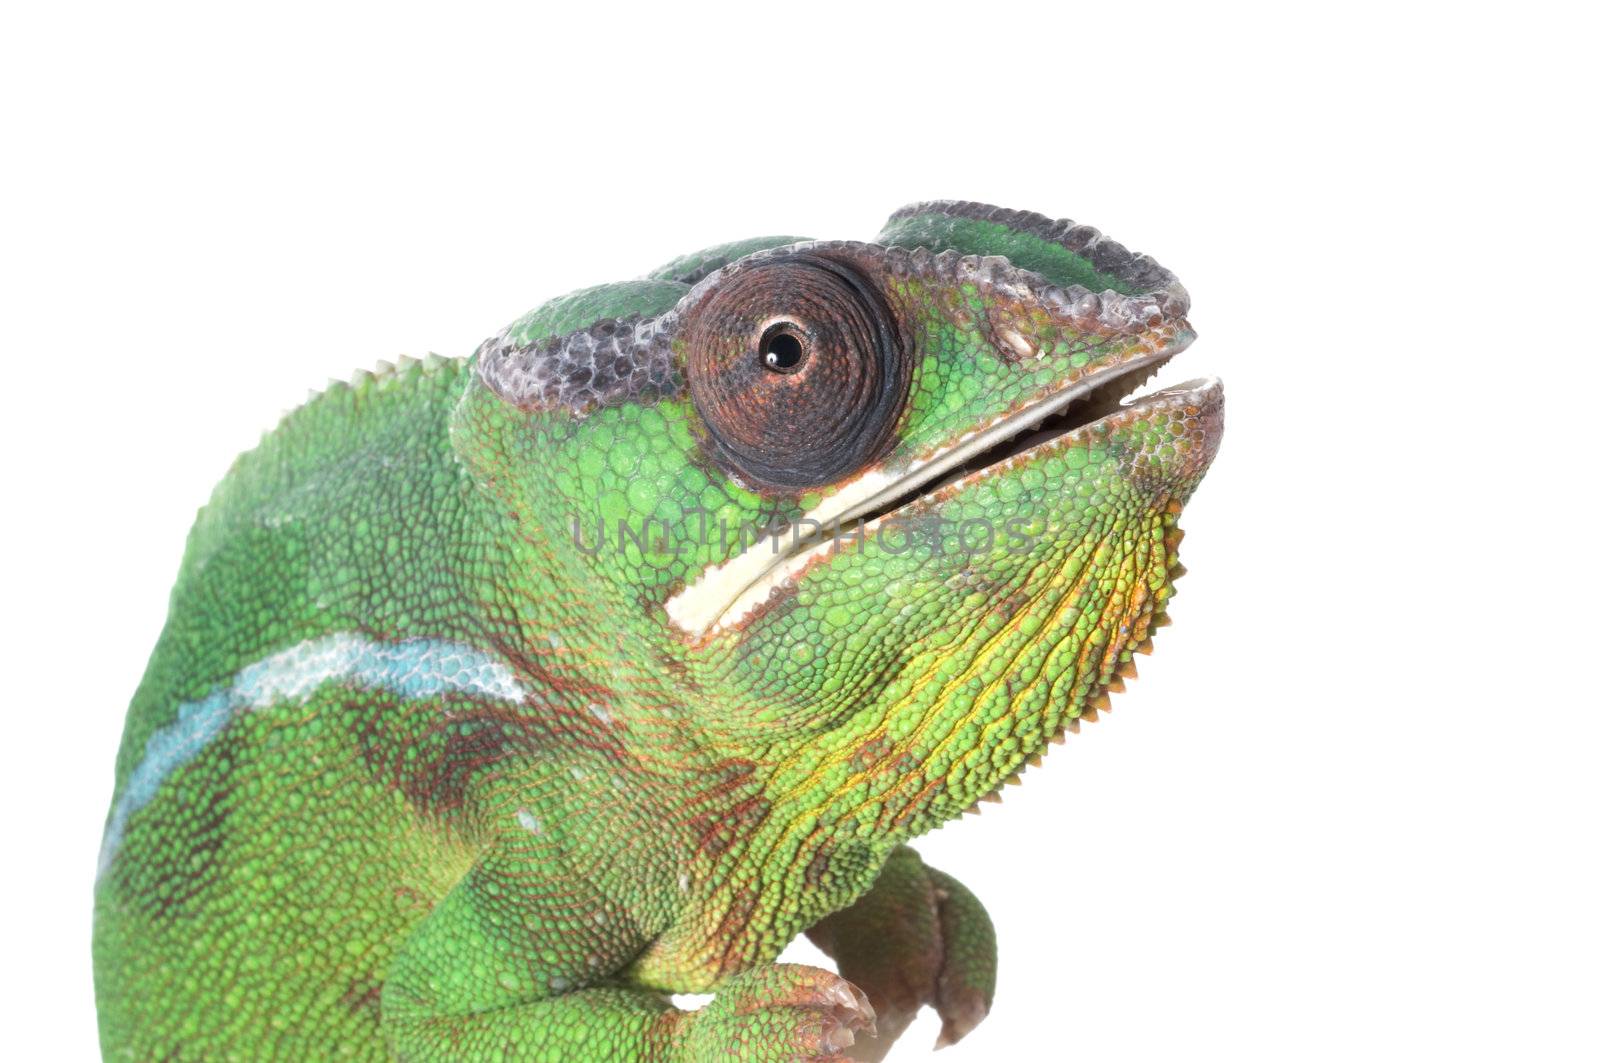 Panther Chameleon close-up staring at viewer. 